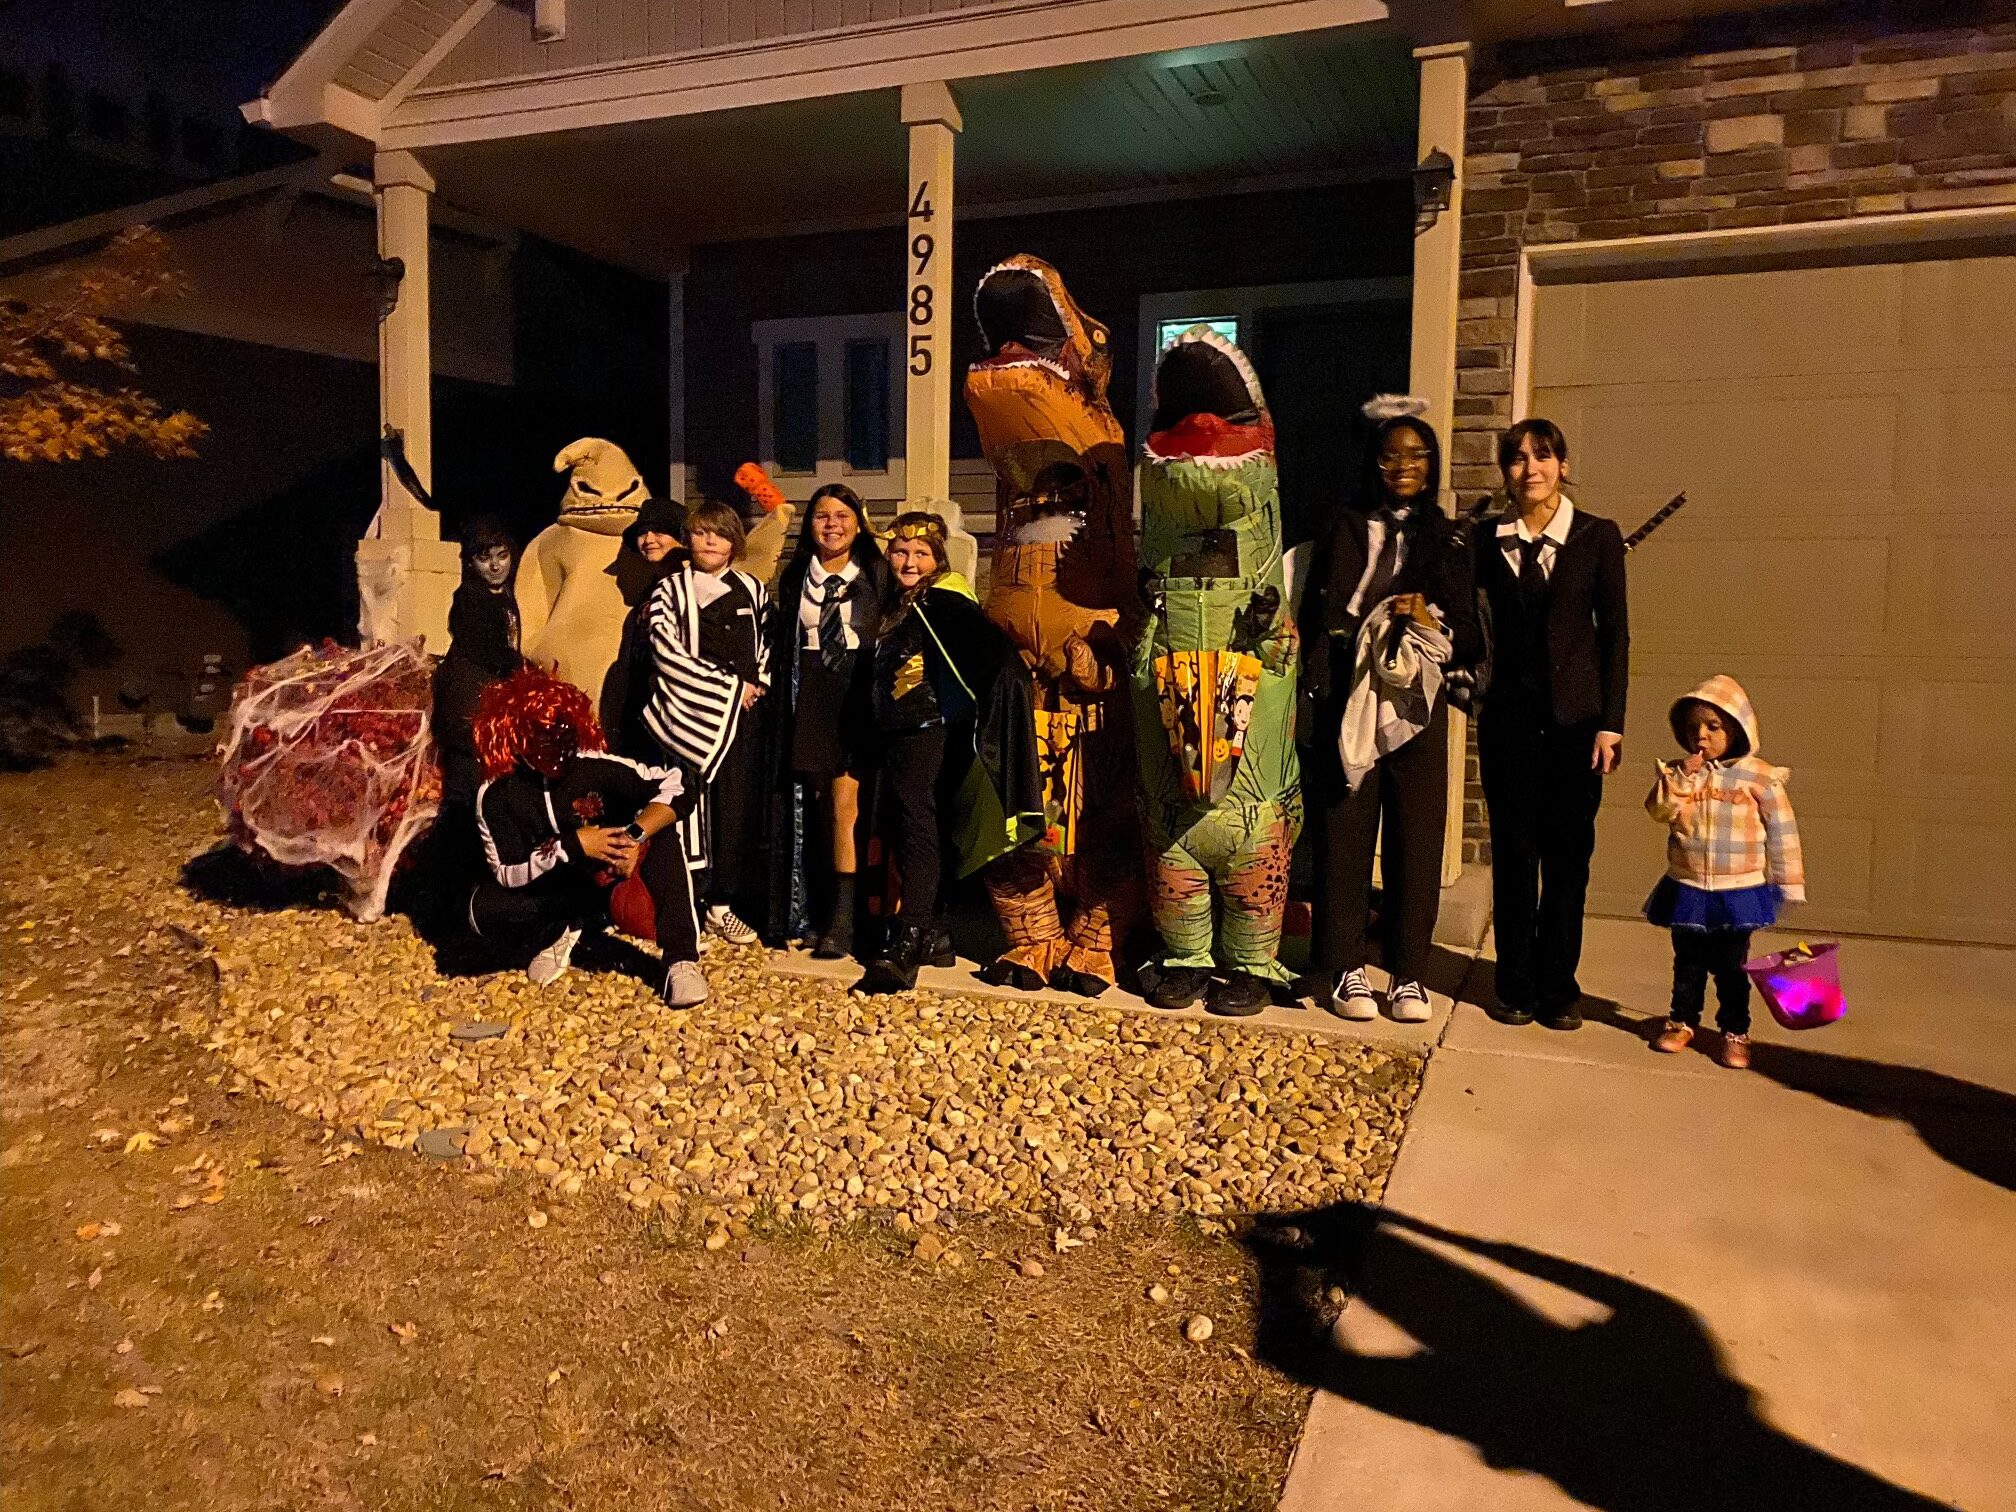 Ghost, goblins and dinosaurs, gather to trick or treat as a group in Denver, Colorado Halloween night